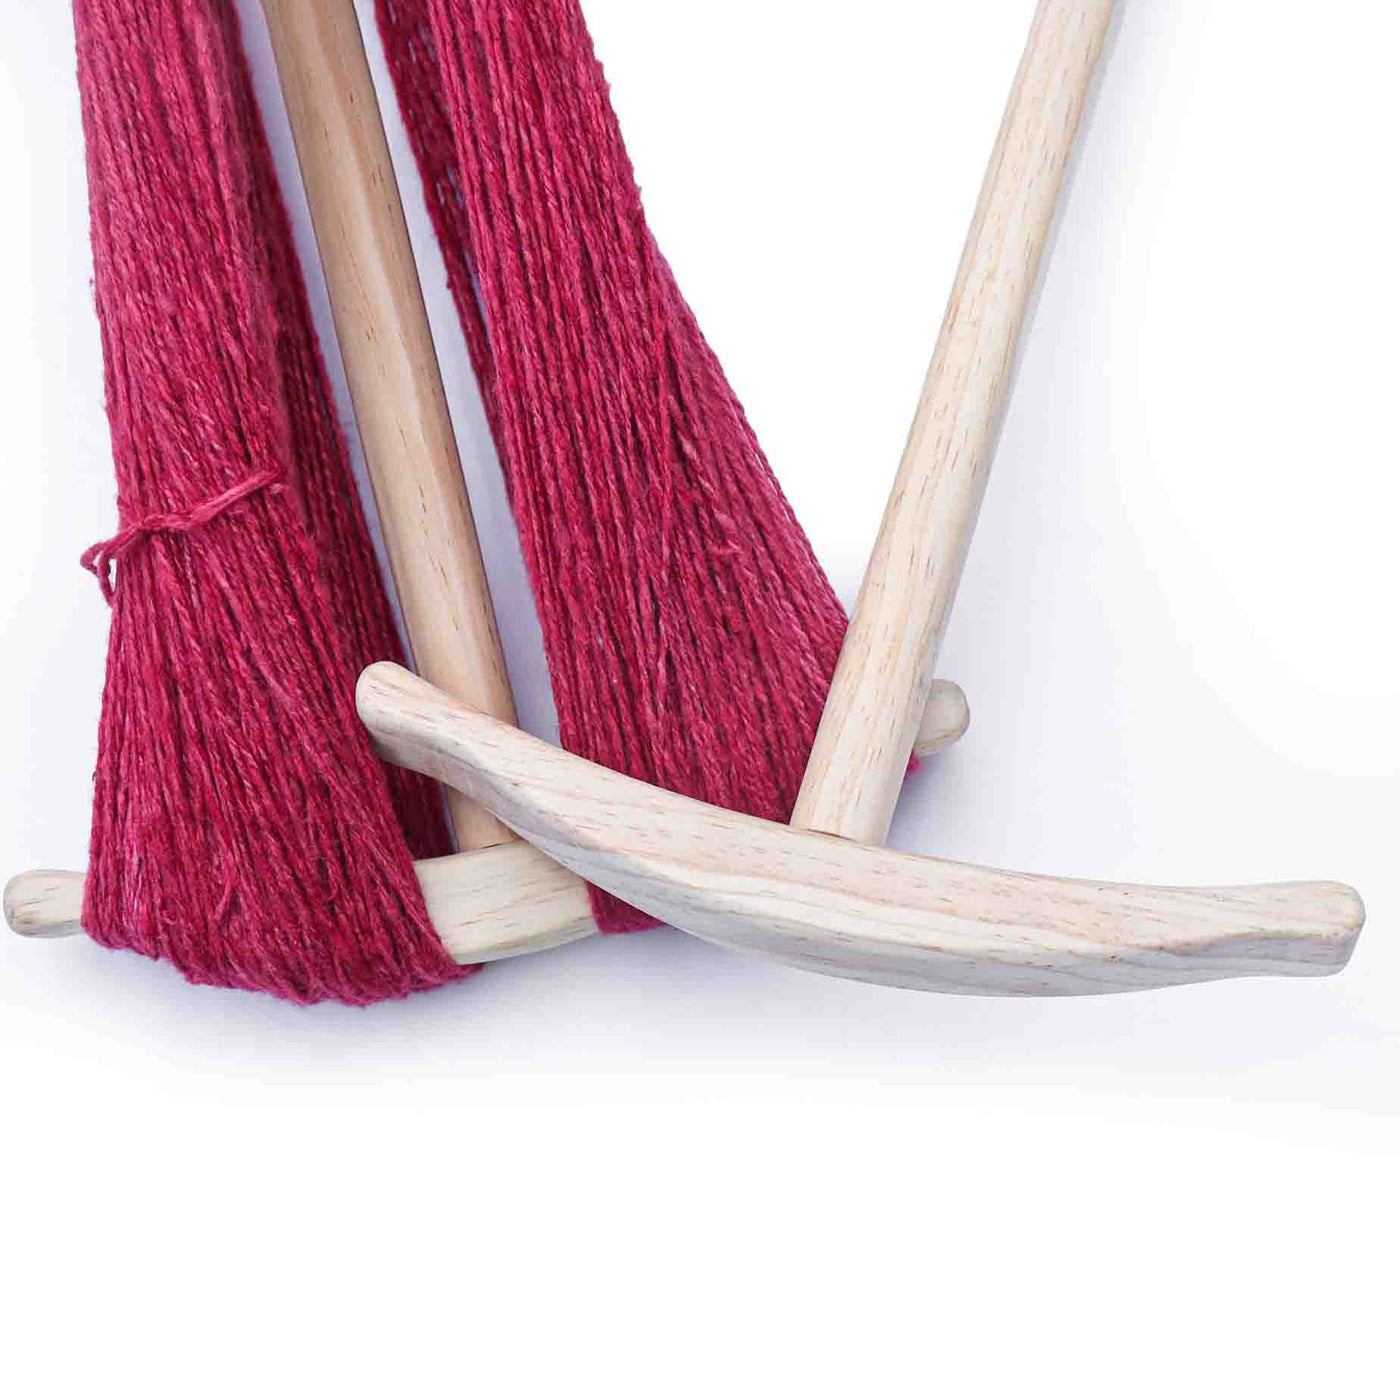 The niddy-noddy is an essential piece of spinning equipment used for winding yarn into skeins.